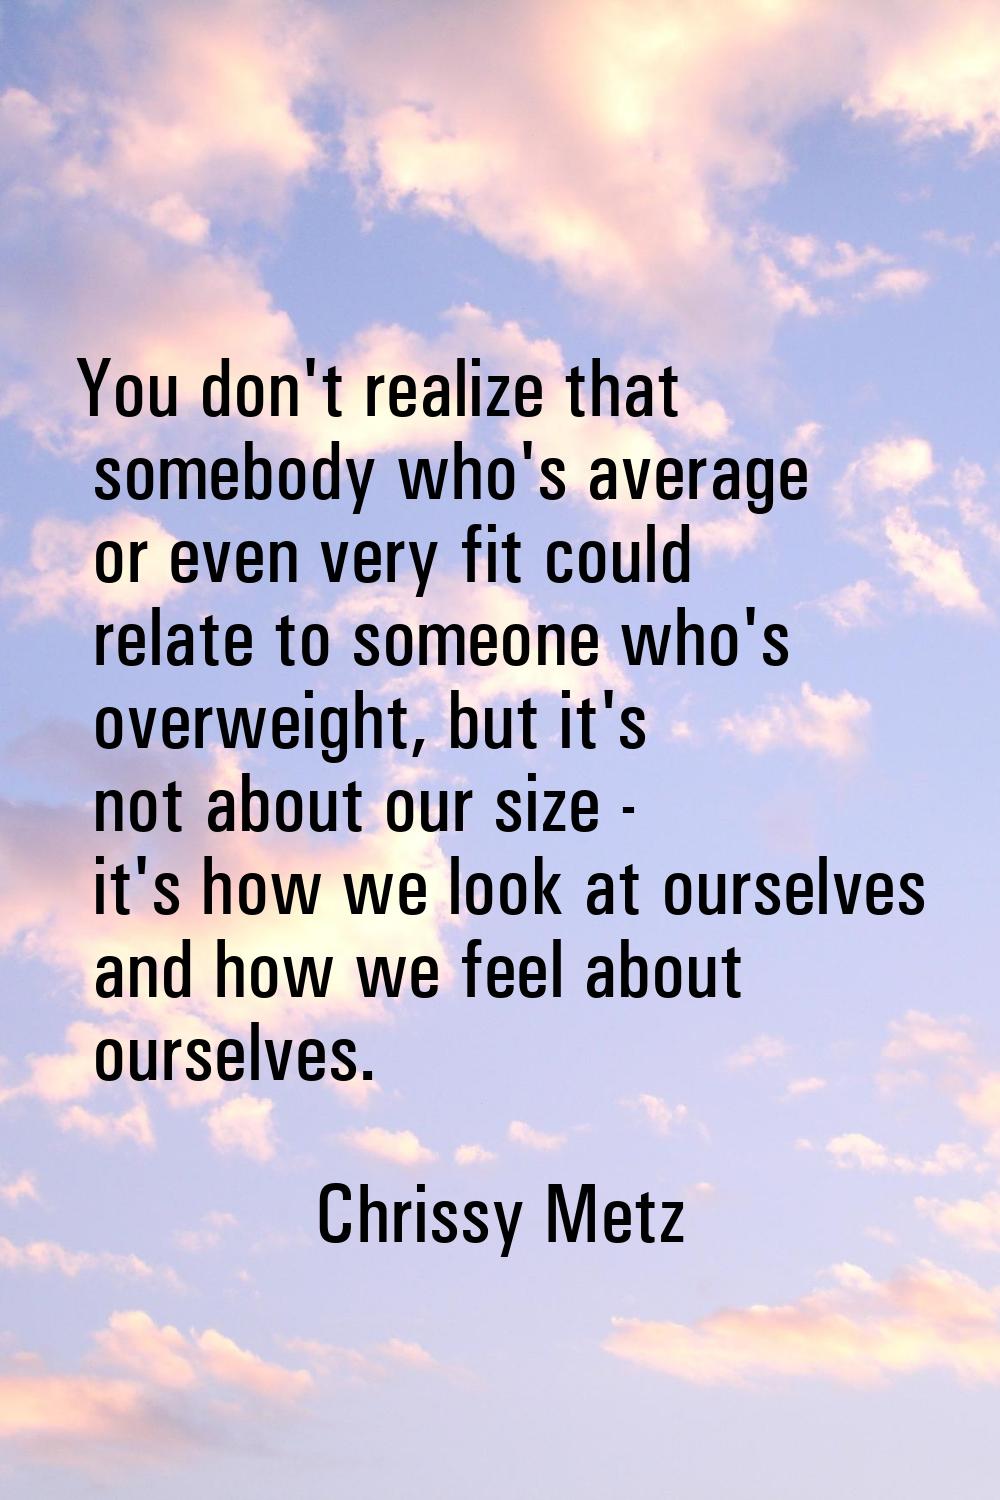 You don't realize that somebody who's average or even very fit could relate to someone who's overwe